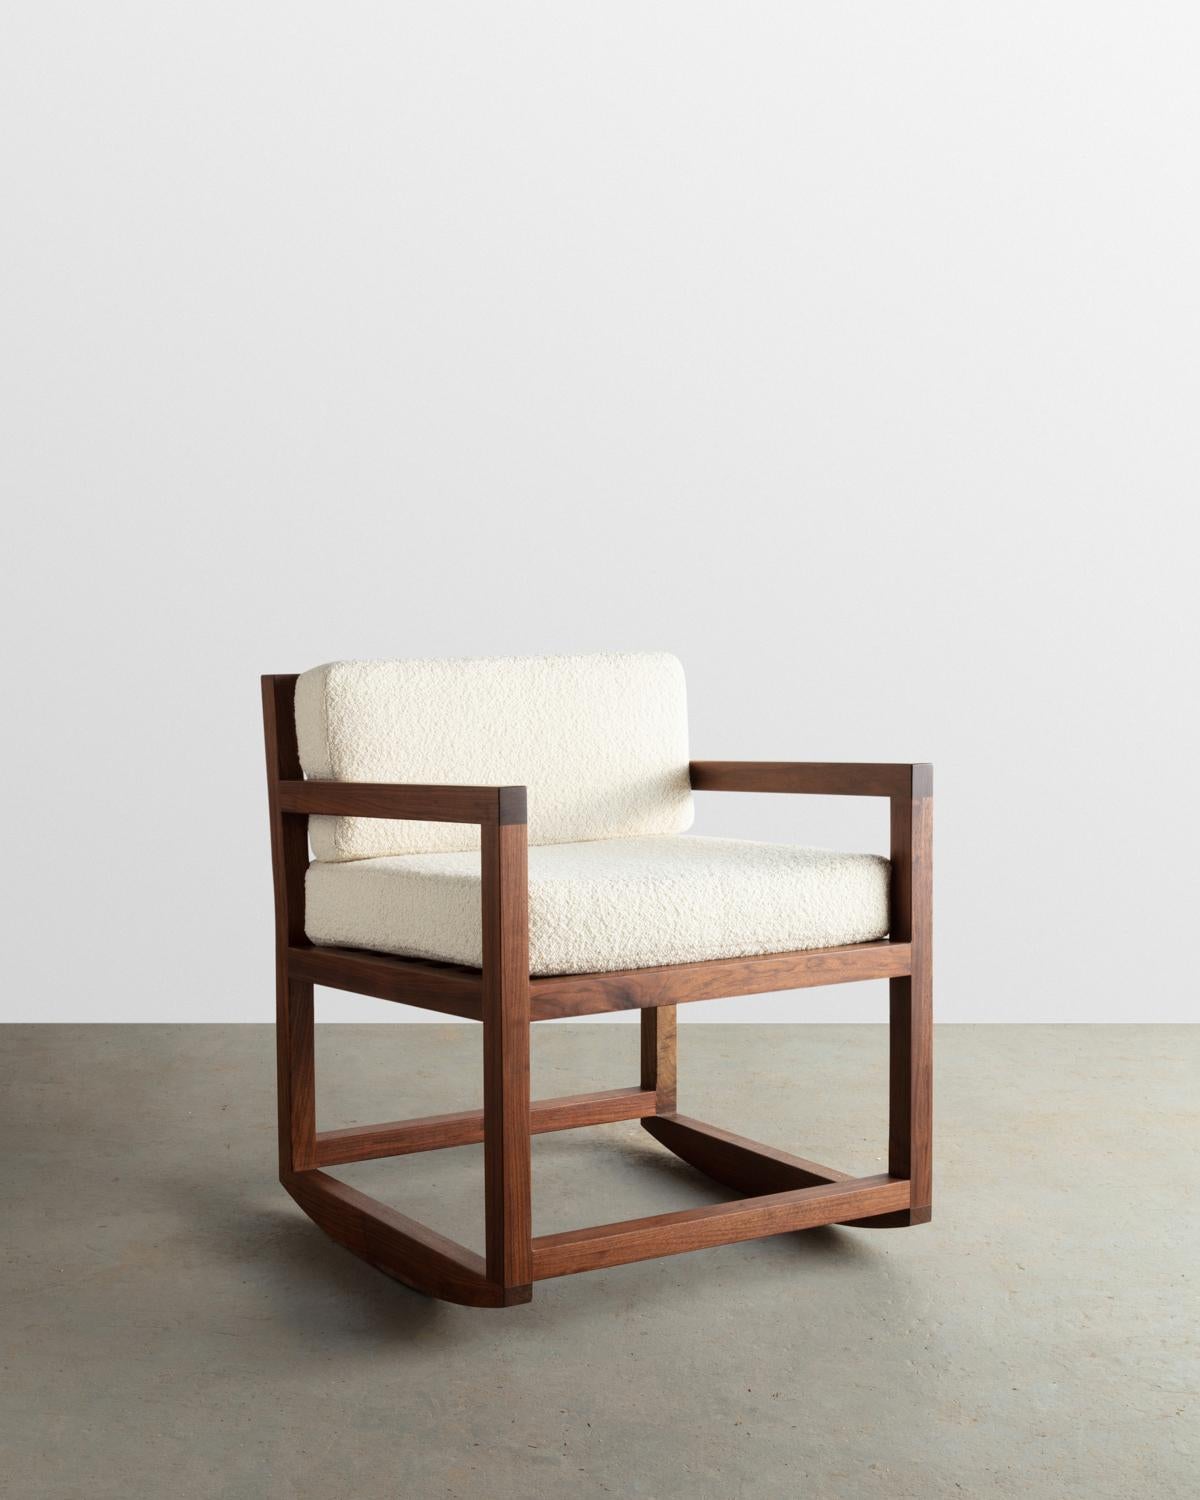 Constructed from solid Walnut this Rocker-lounge chair is designed and built to last. Its seat and backrest are upholstered with a natural Bouclé fabric.